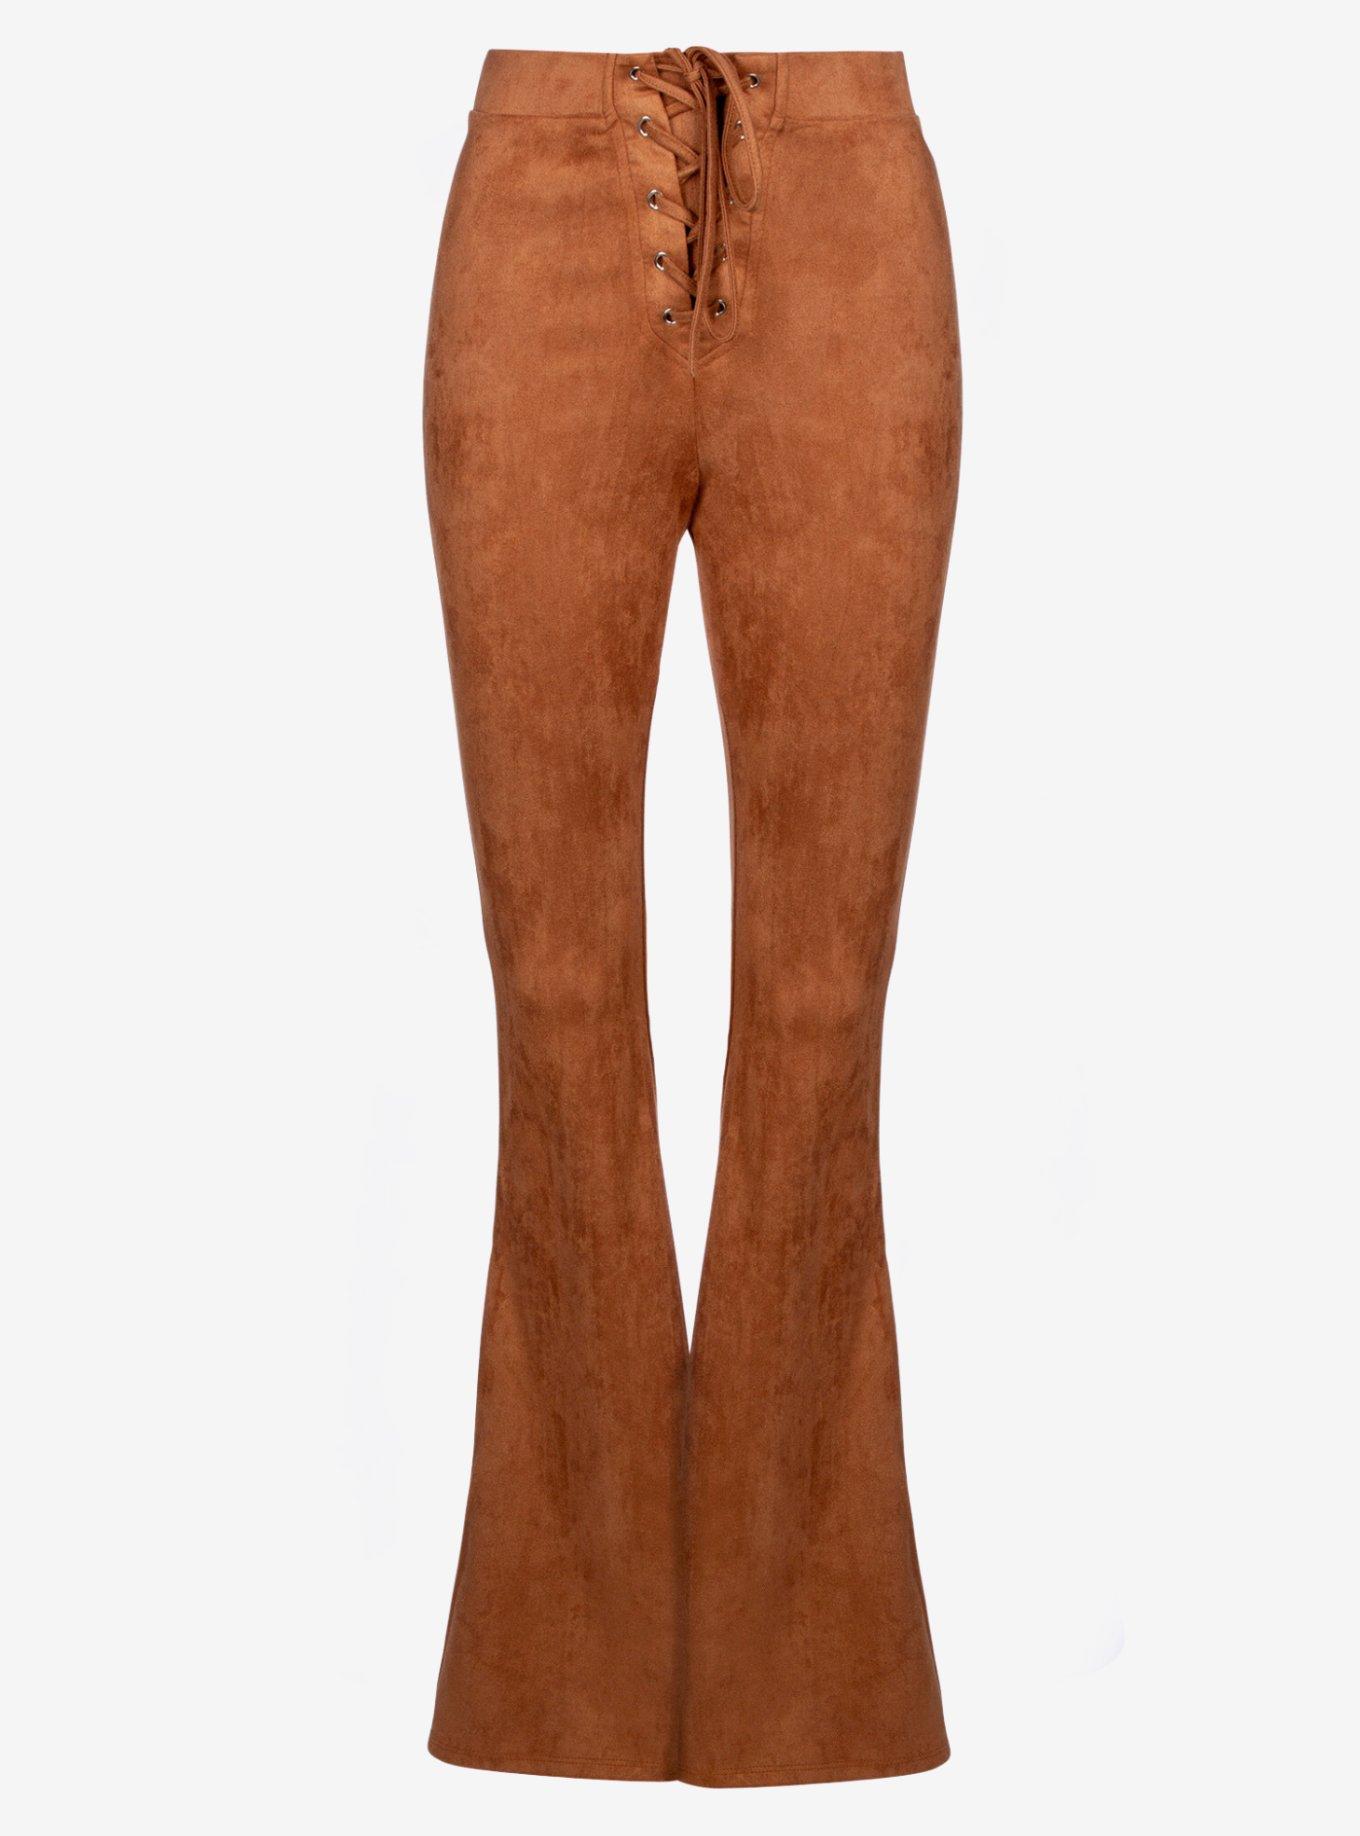 Hot Topic Brown Faux Suede Bell Bottom Flare Pants